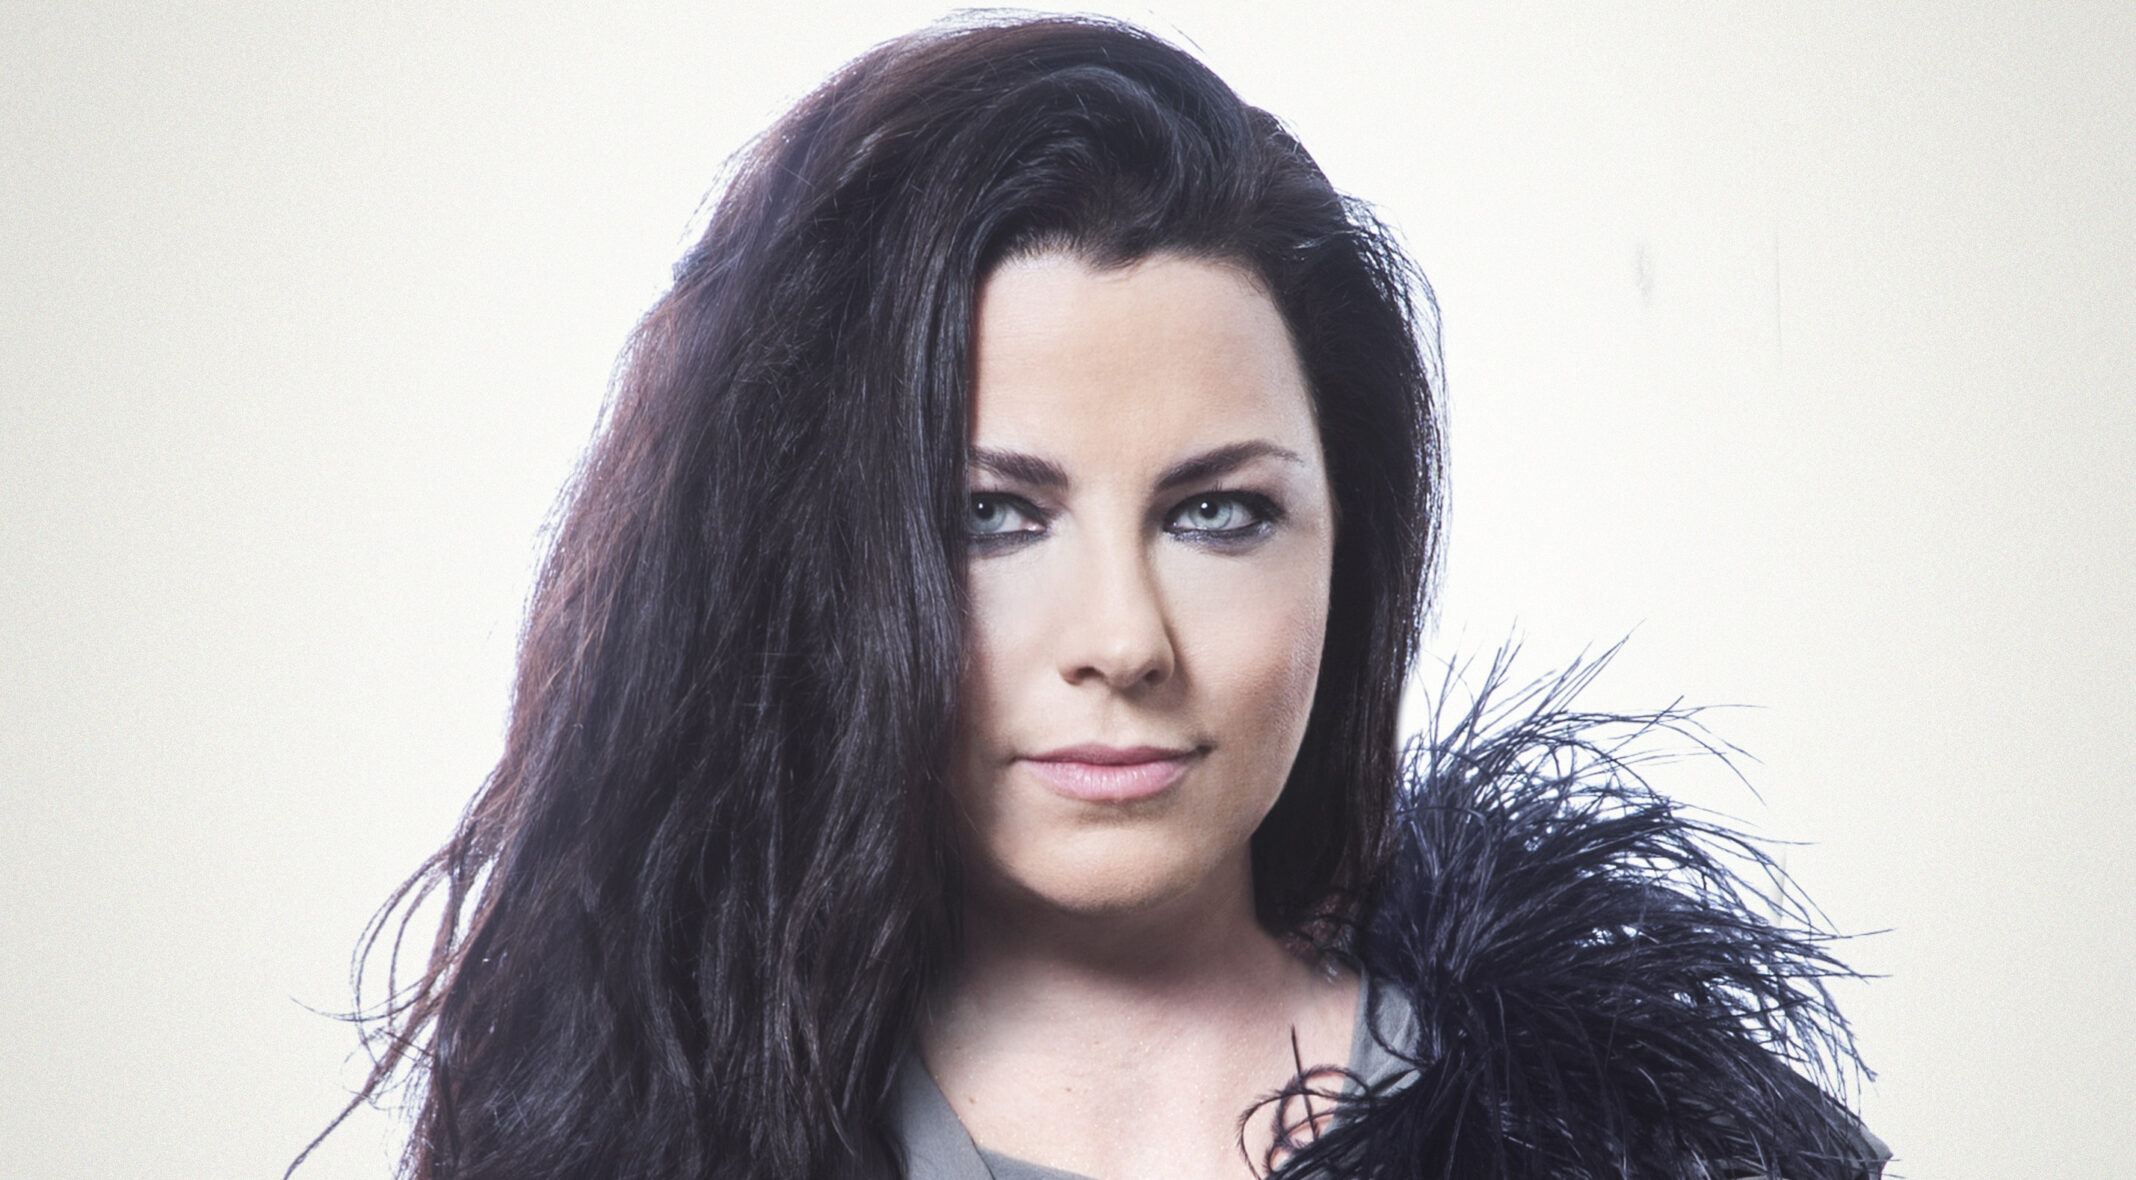 Evanescence's Amy Lee "What we're up against now is something that